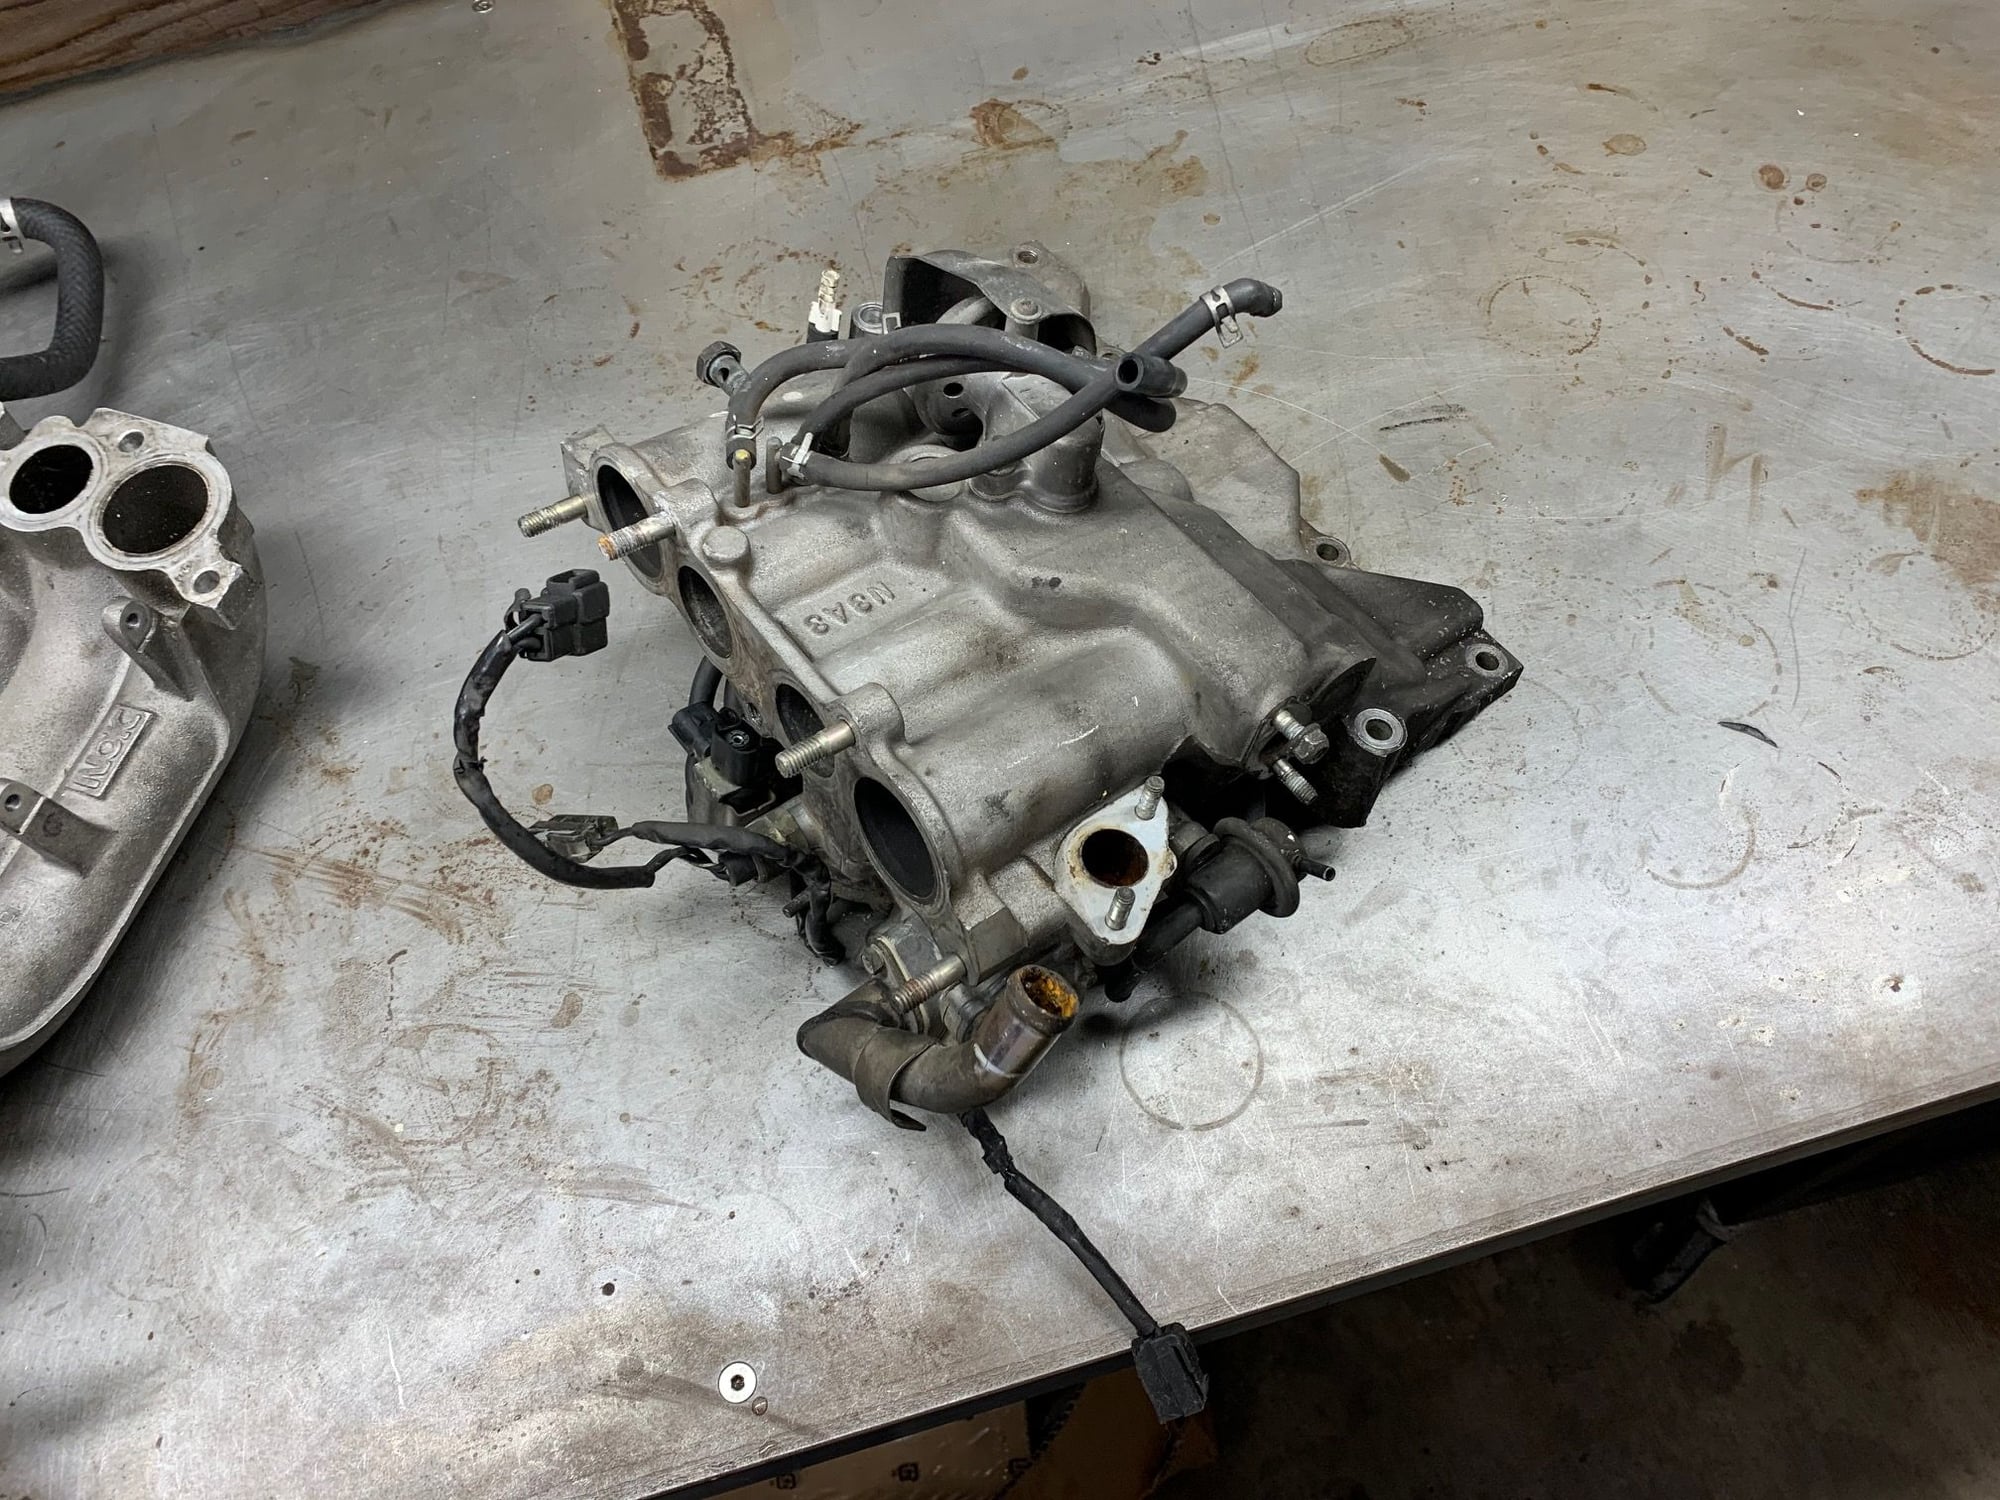 Engine - Intake/Fuel - Complete Intake Manifold, Throttle Body, Injectors, Fuel Rail - Used - 1986 to 2001 Mazda RX-7 - Fort Wayne, IN 46804, United States